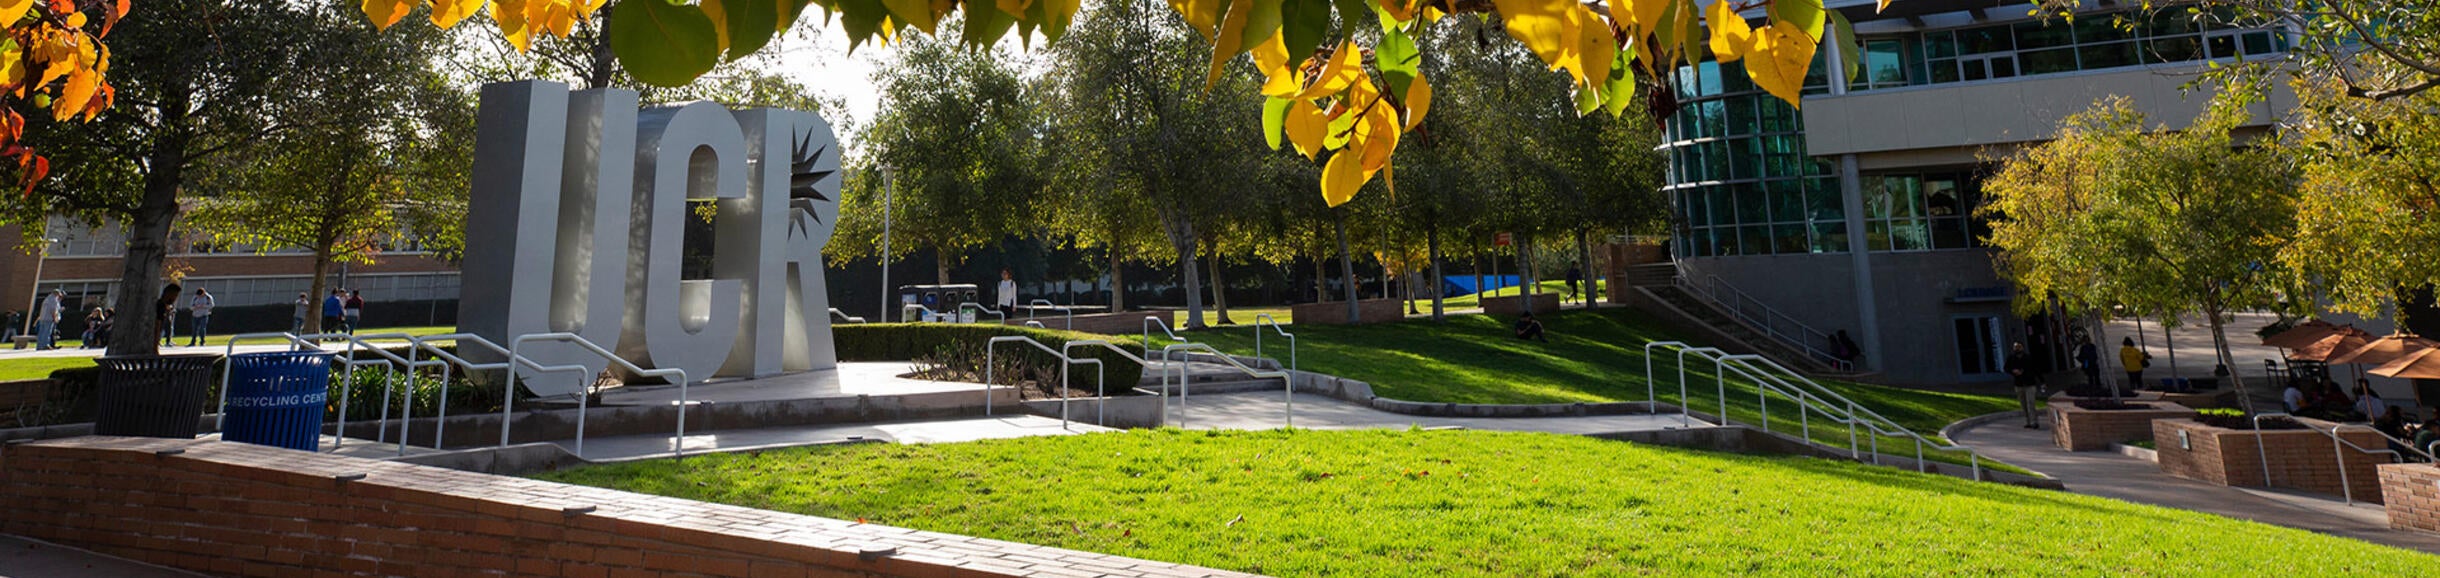 UCR Sign in fall